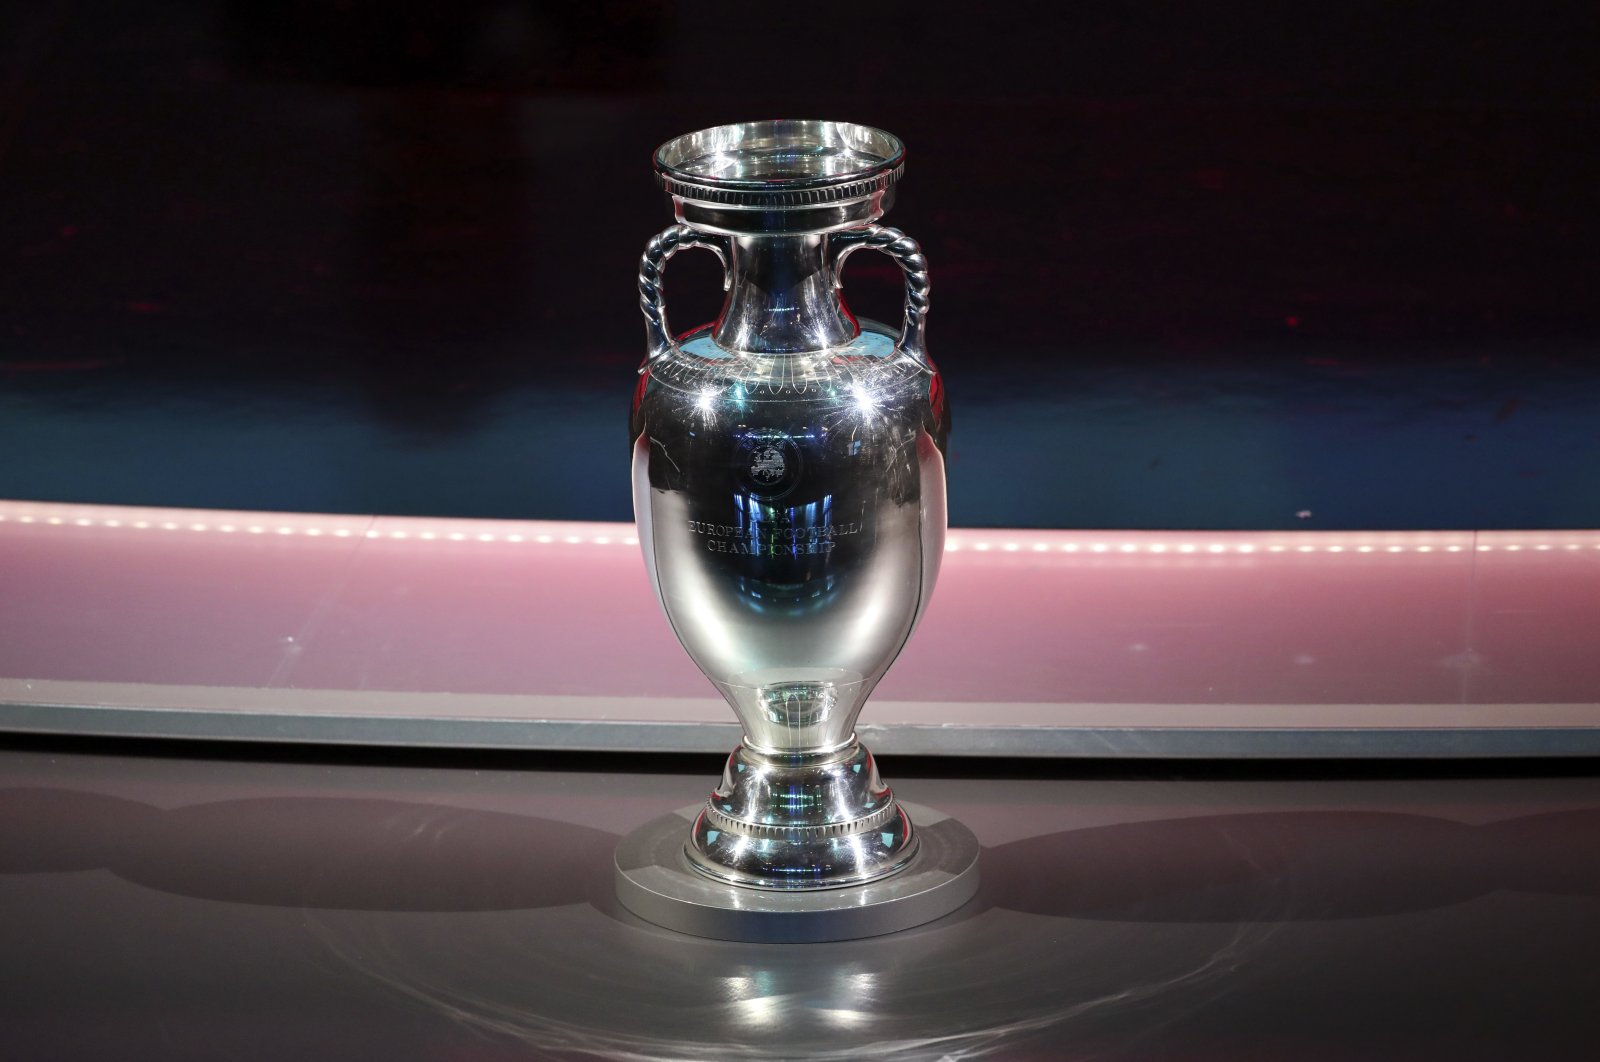 The Henri Delaunay Trophy is displayed on the stage during the UEFA Euro 2020 European championship draw, Dublin, Ireland, Dec. 2, 2018. (AP Photo)